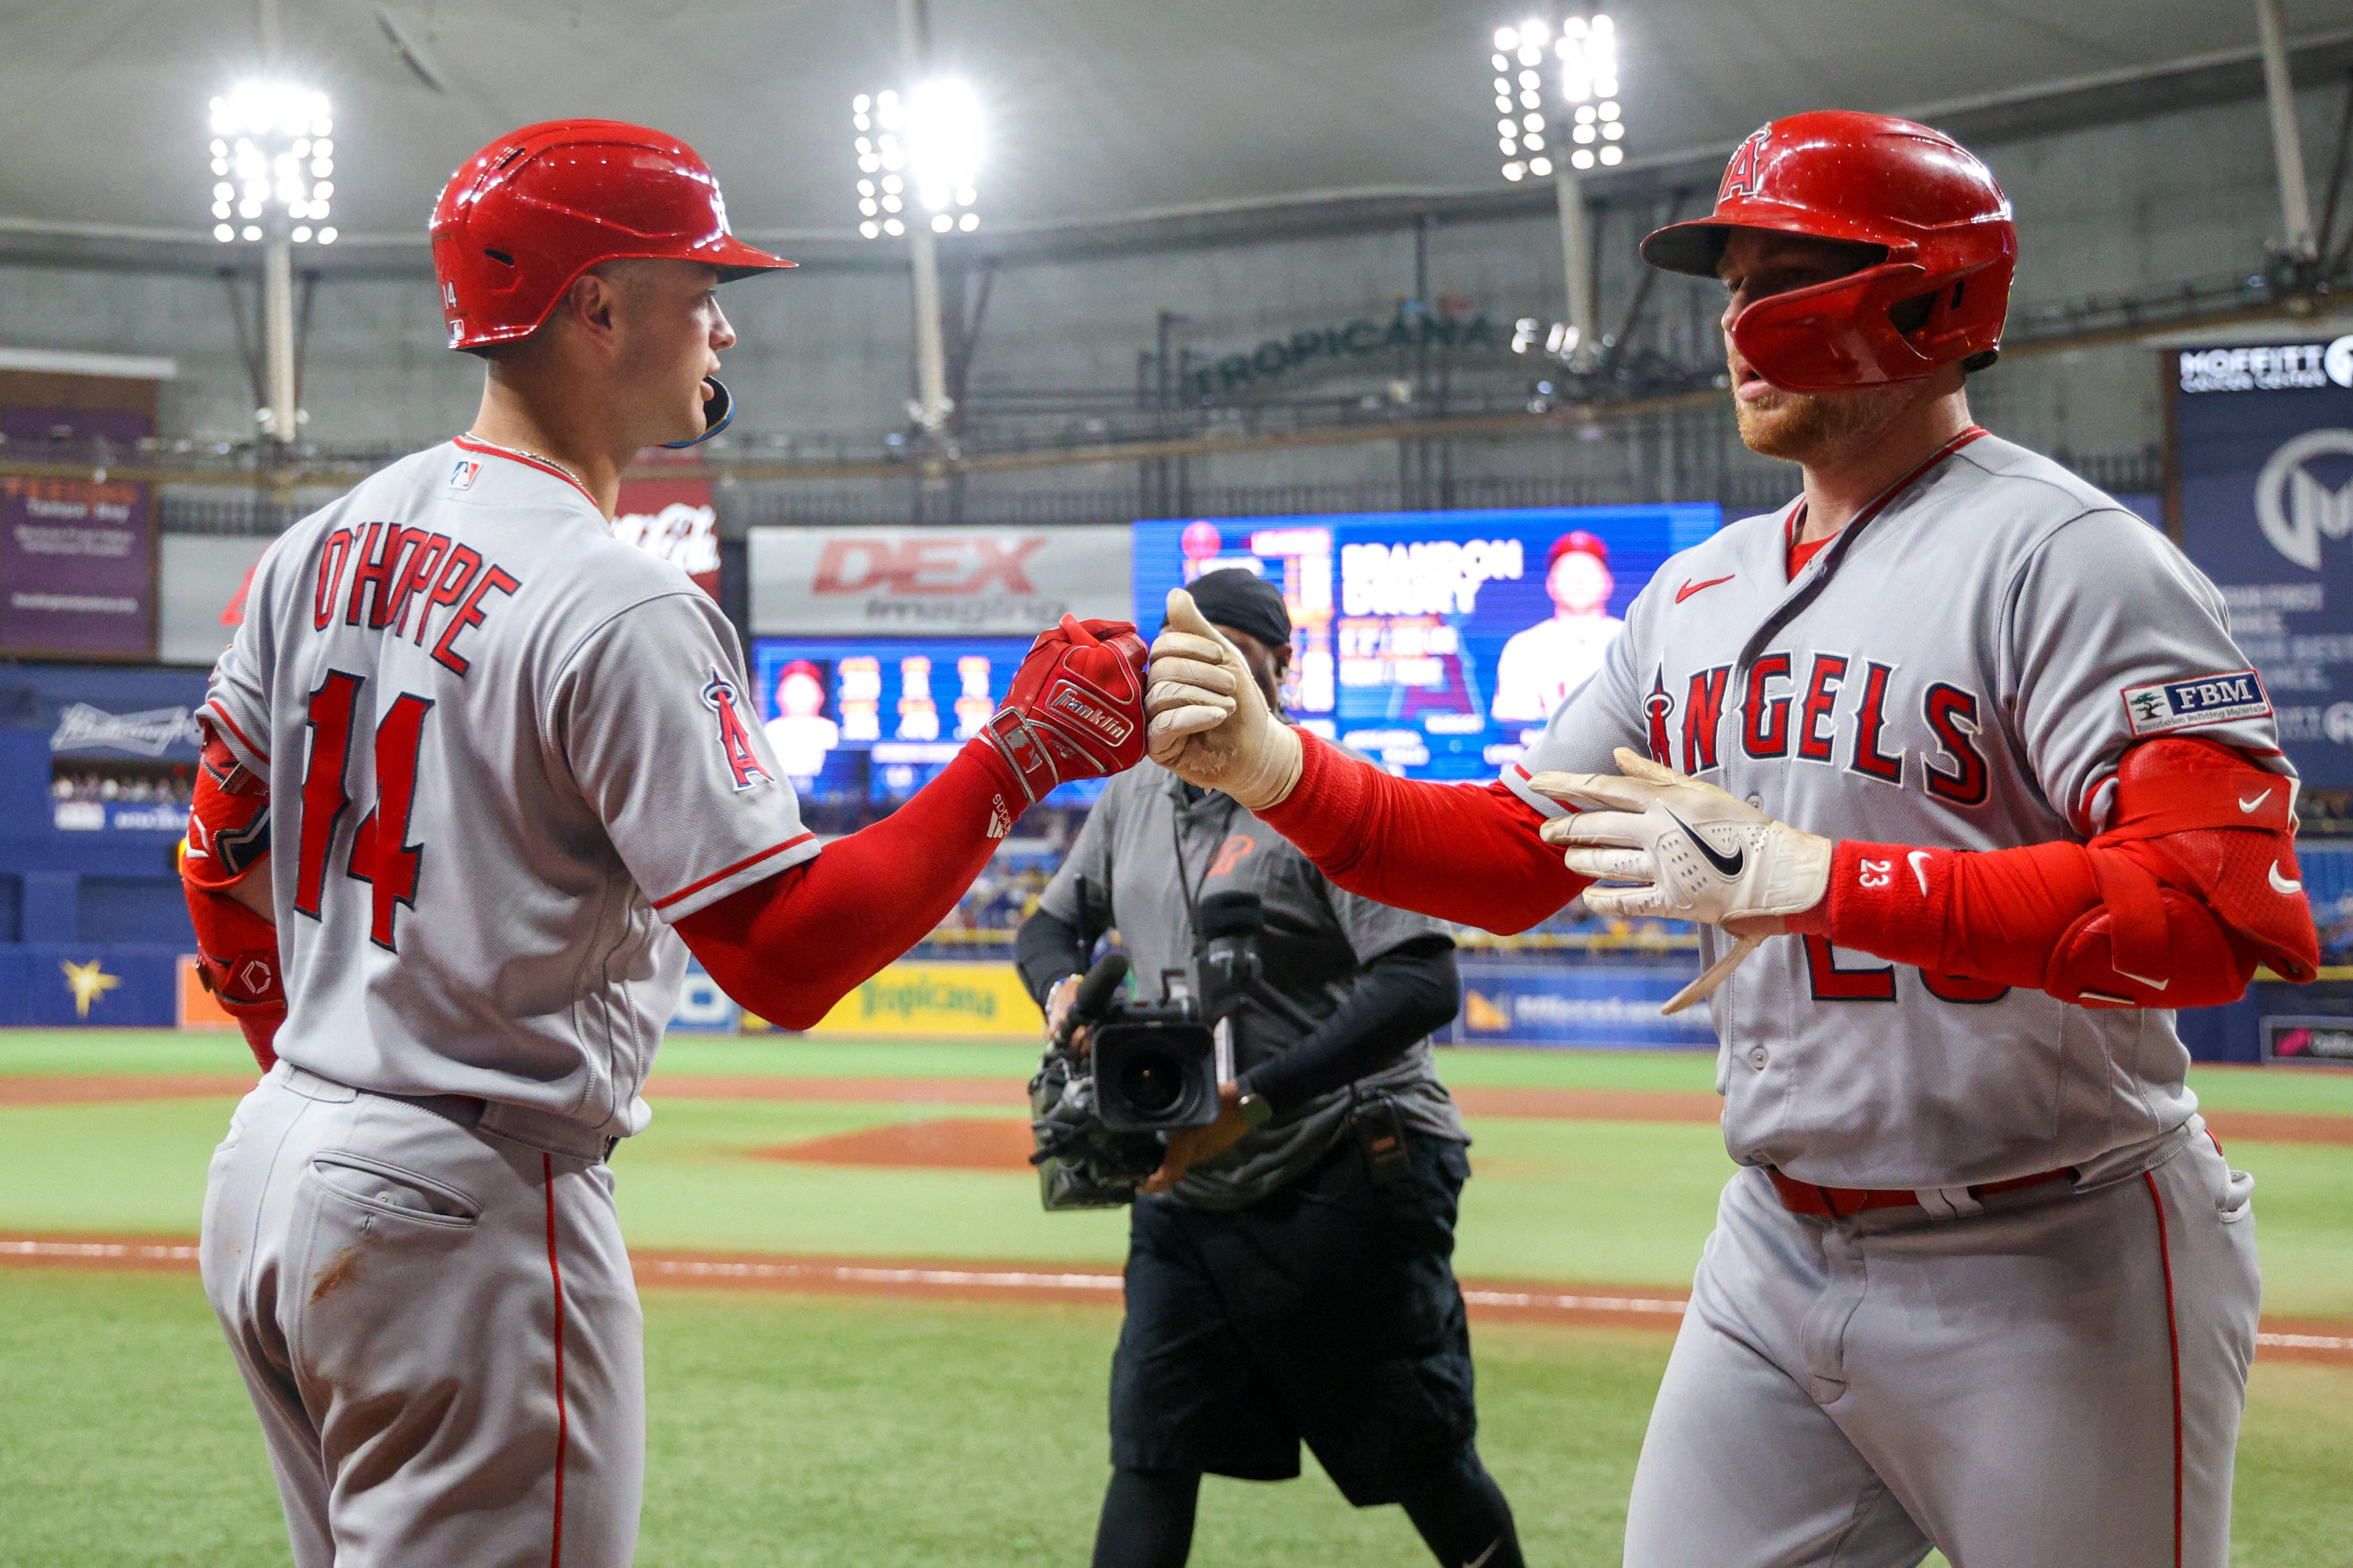 Brandon Drury racks up 5 RBIs as Angels smack Rays - Field Level Media -  Professional sports content solutions